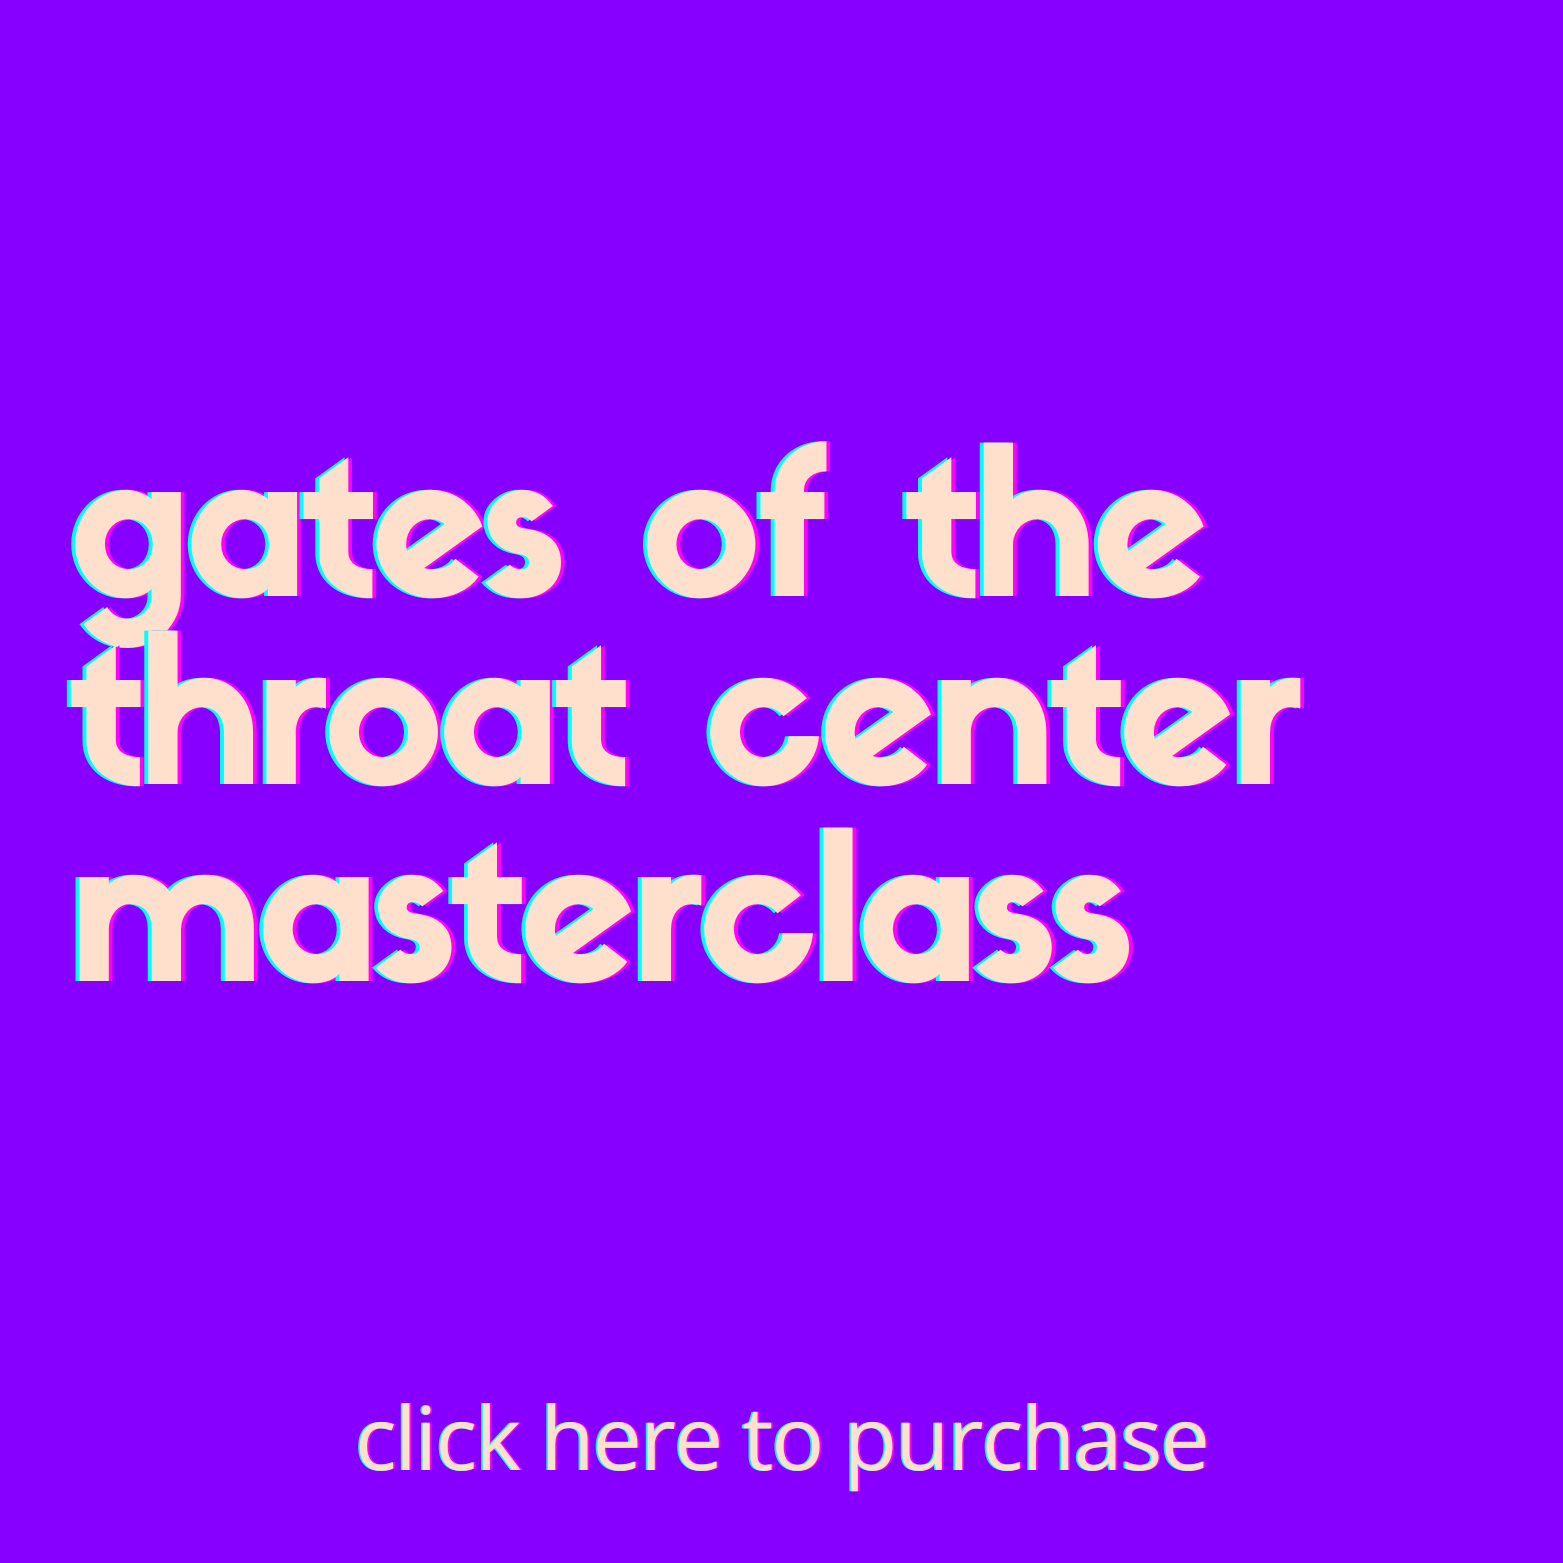 gates of the throat center masterclass square.png